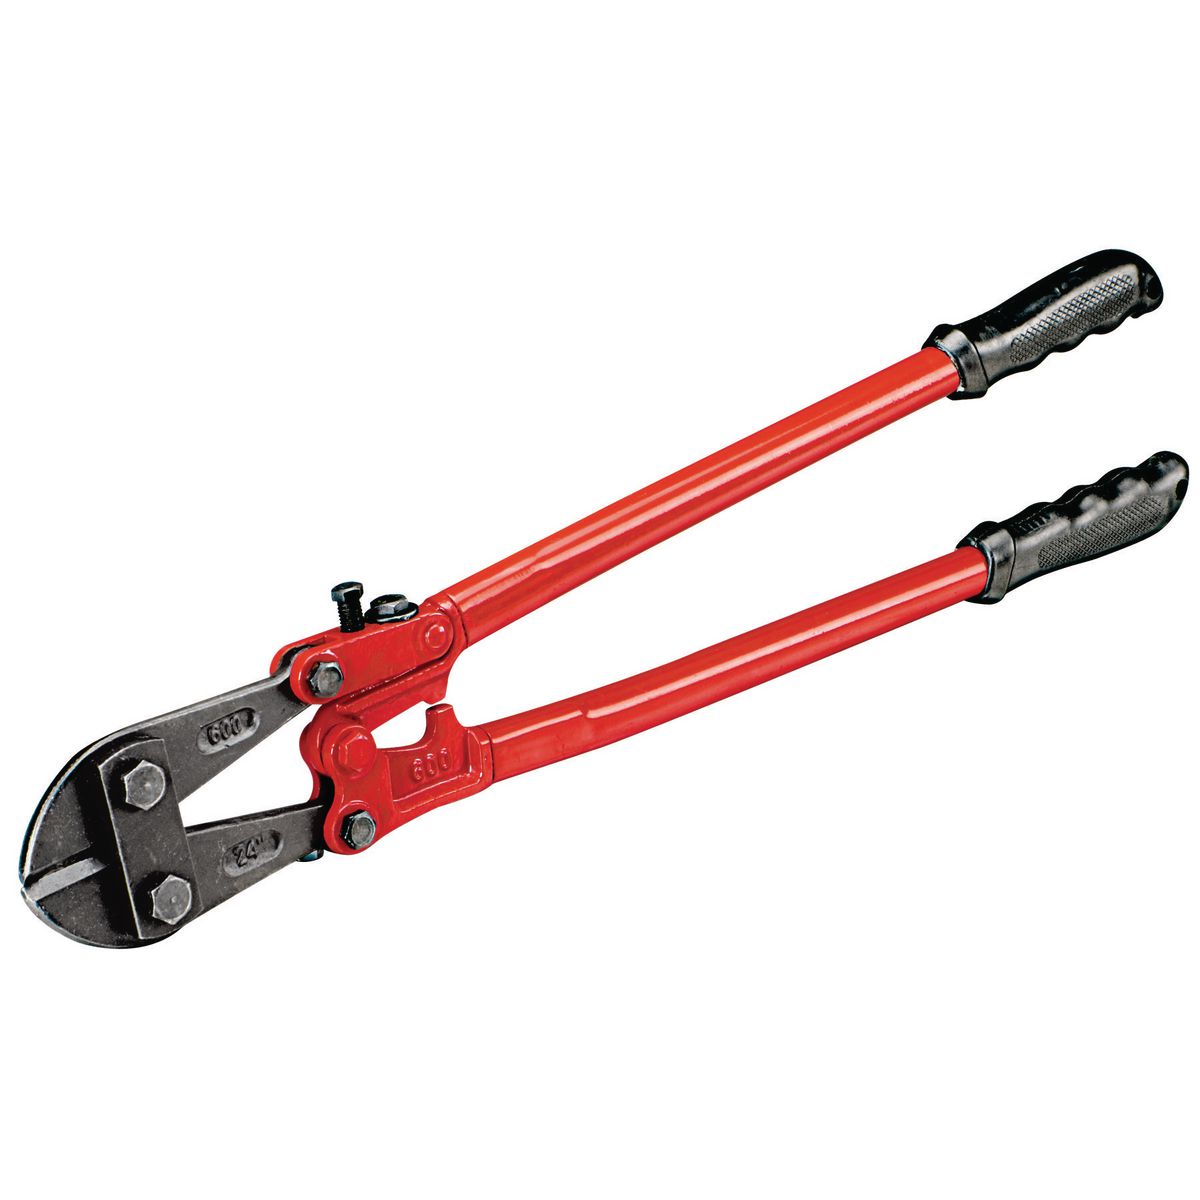 PITTSBURGH 24 in. Bolt Cutters – Item 60699 / 41149 – Harbor Freight